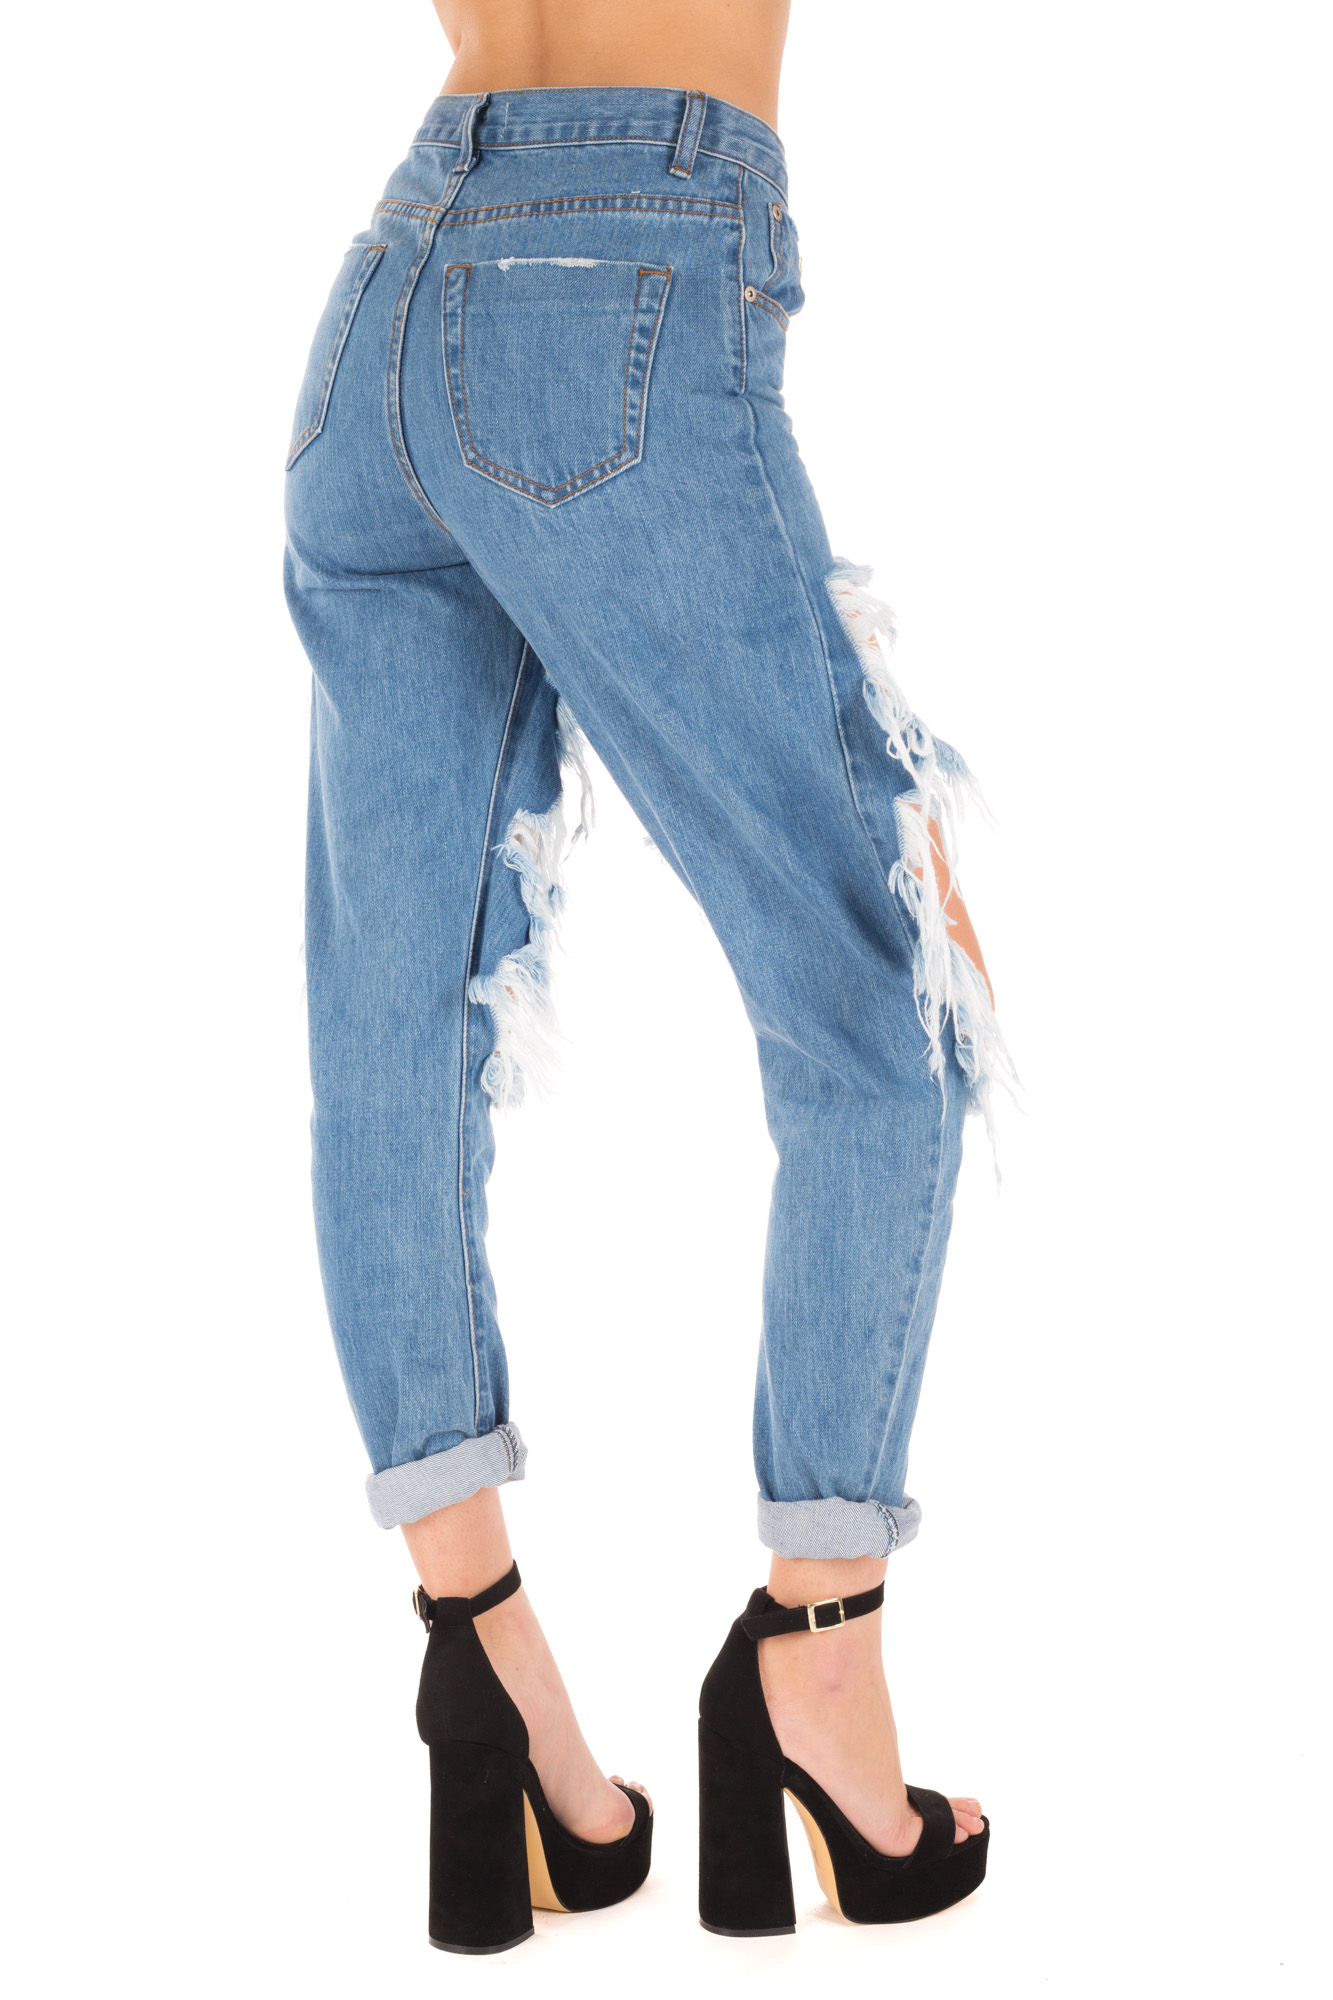 Glamorous - High waist dark jeans with weathered effect